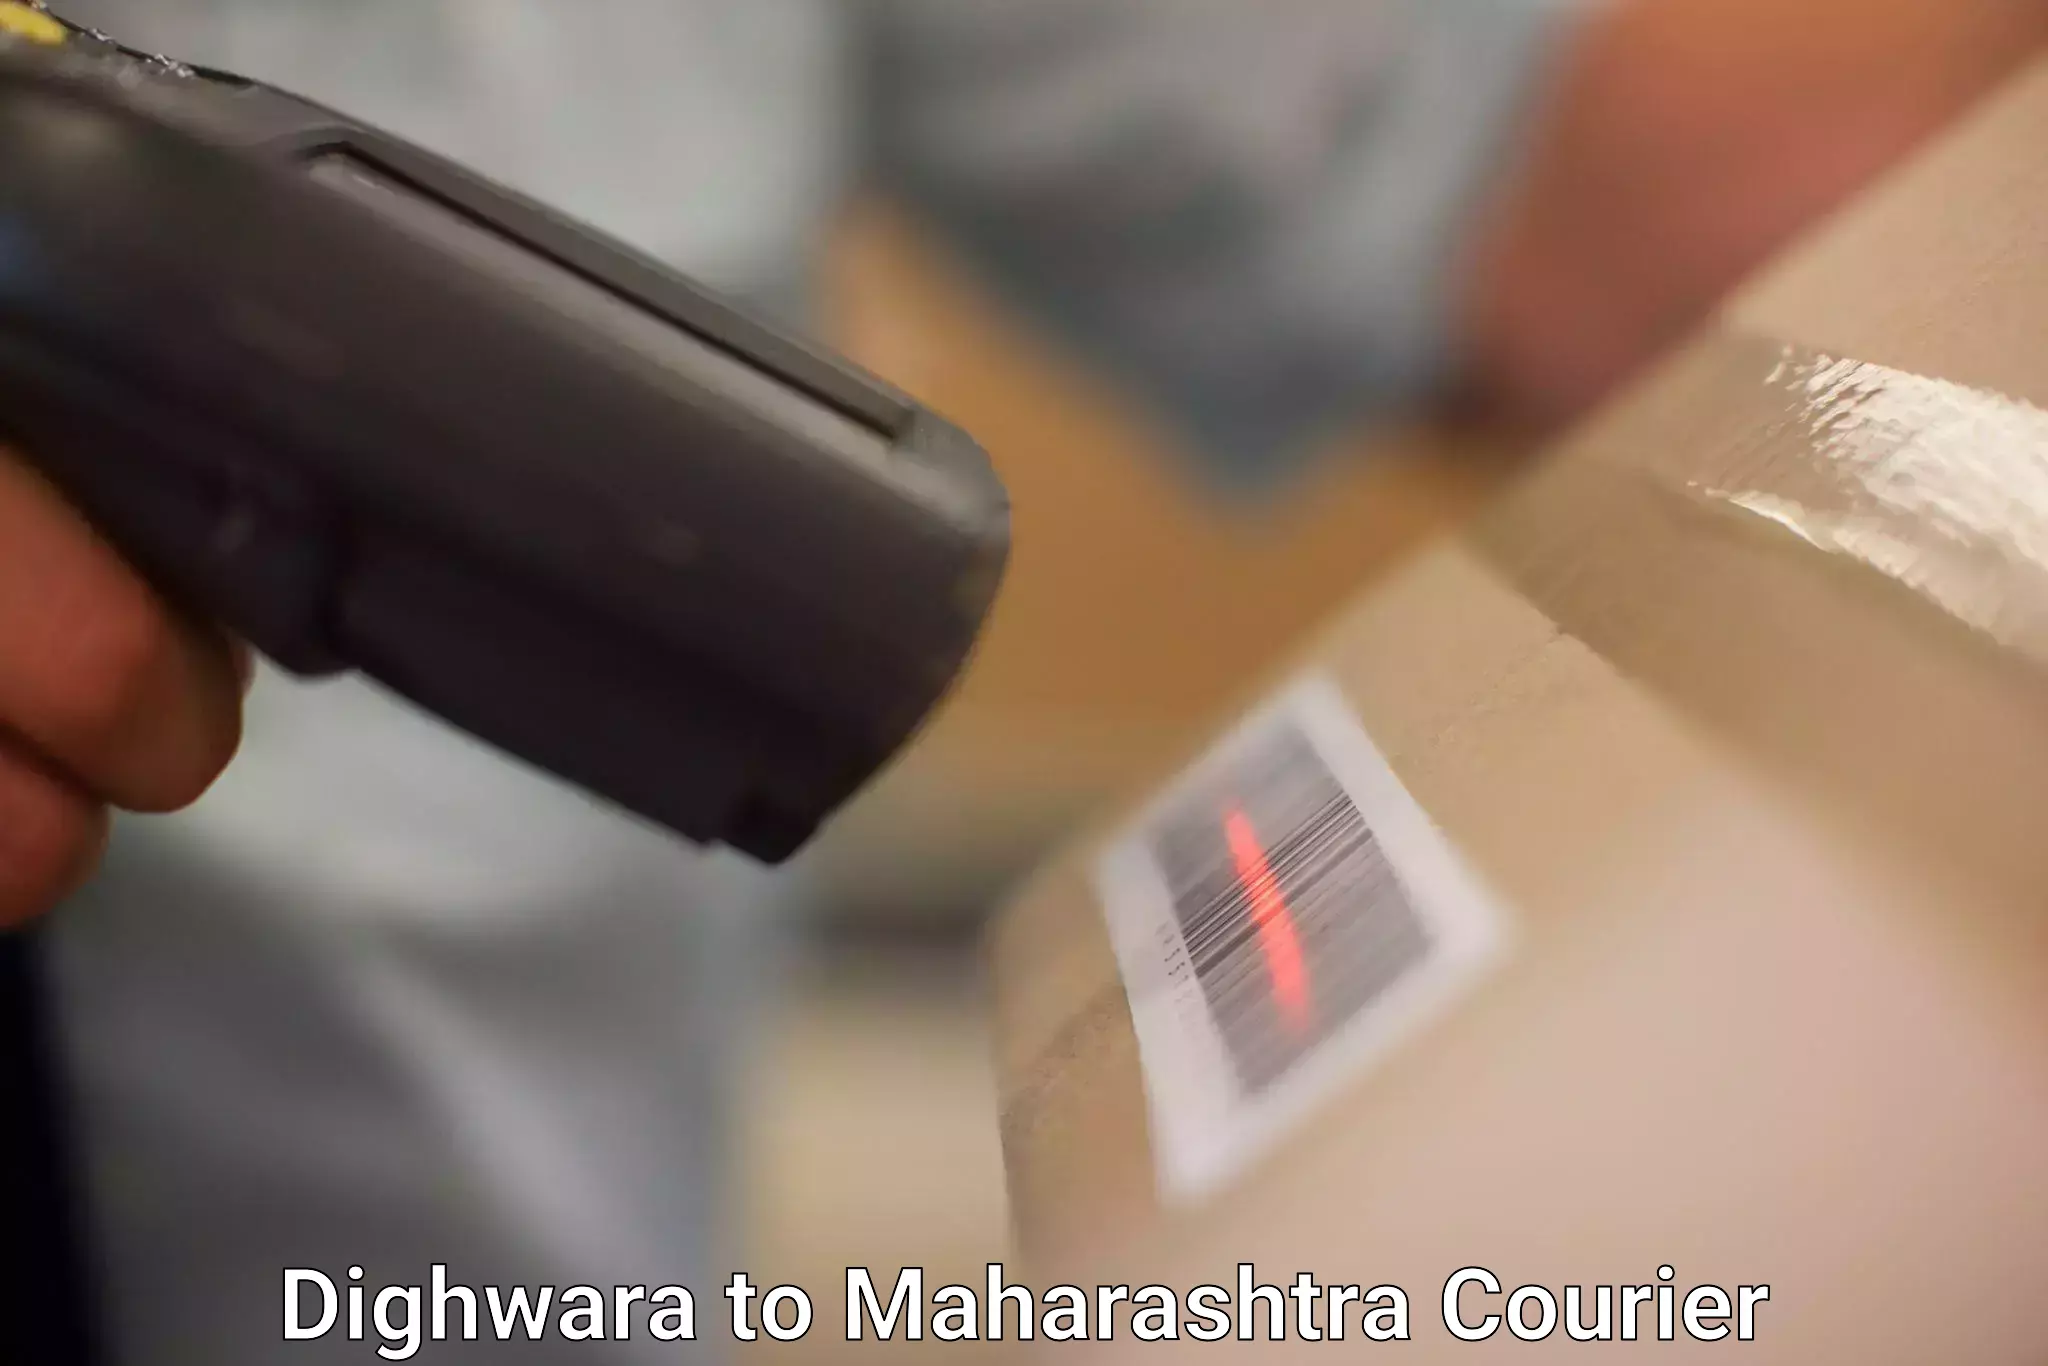 Corporate courier solutions Dighwara to Khandala Pune